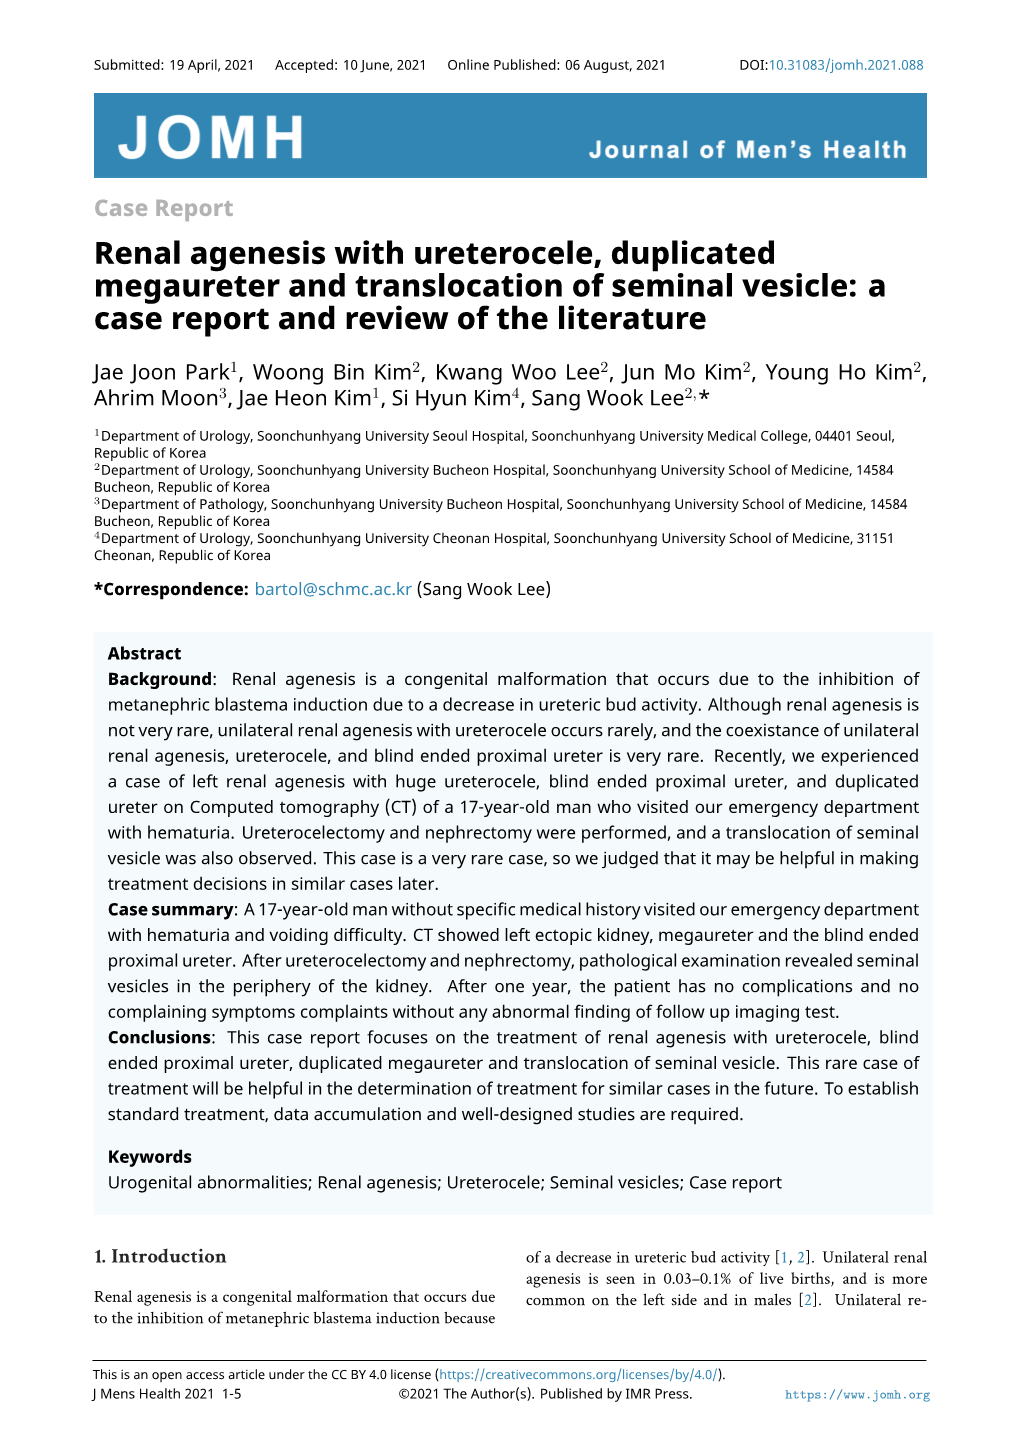 Renal Agenesis with Ureterocele, Duplicated Megaureter and Translocation of Seminal Vesicle: a Case Report and Review of the Literature